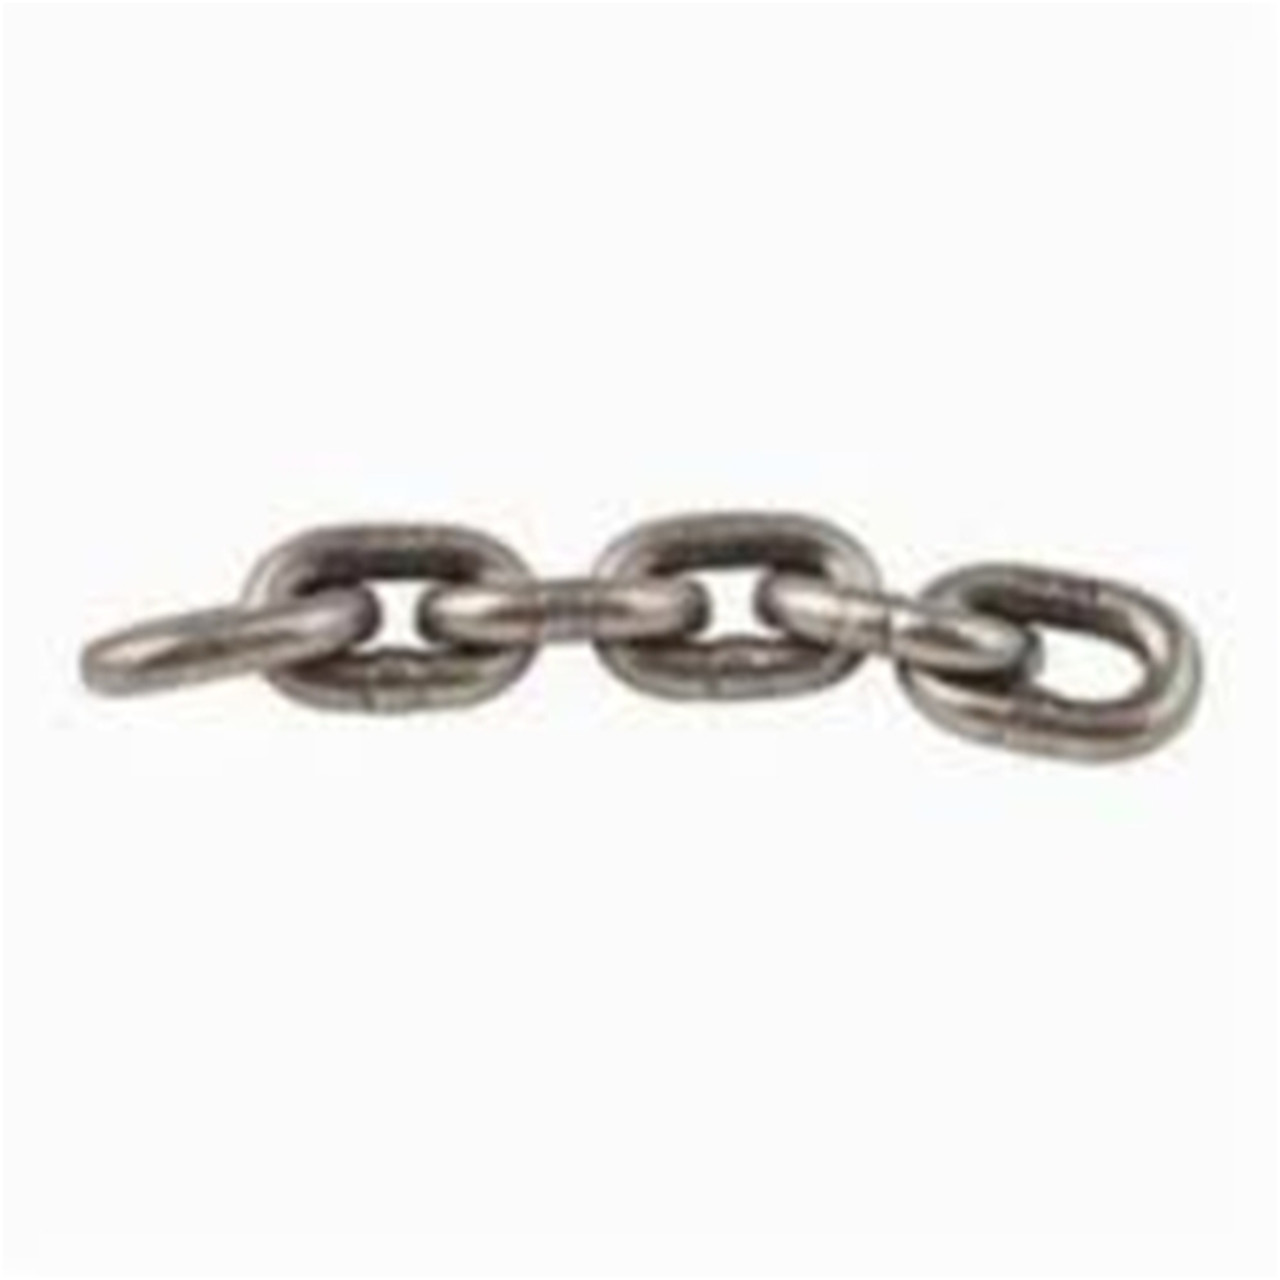 Coffing JL19-1 load chain